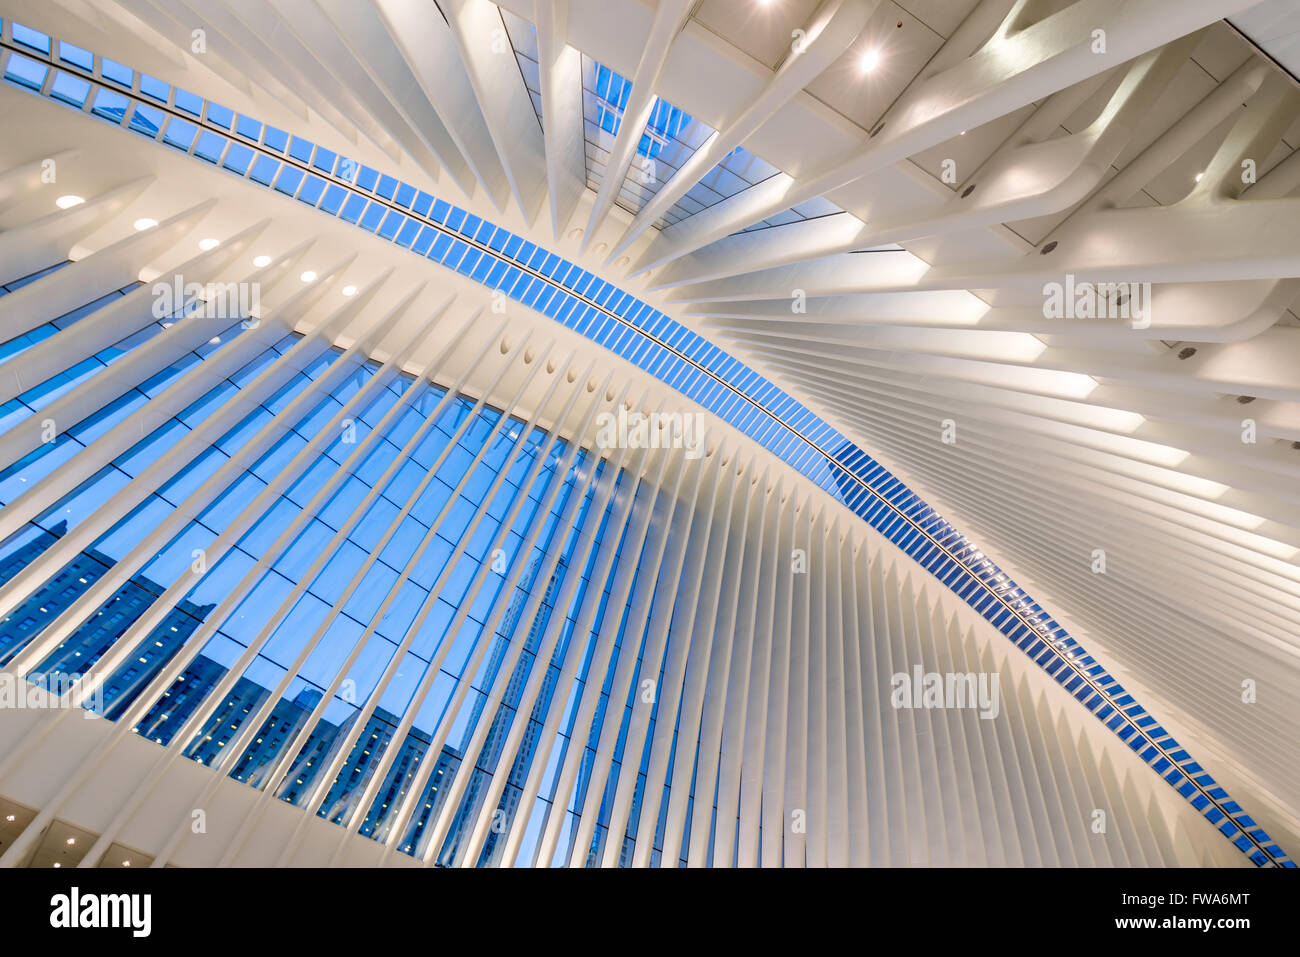 Interior view of the Oculus, World Trade Center Path Station at twilight, Manhattan Financial District, New York City Stock Photo